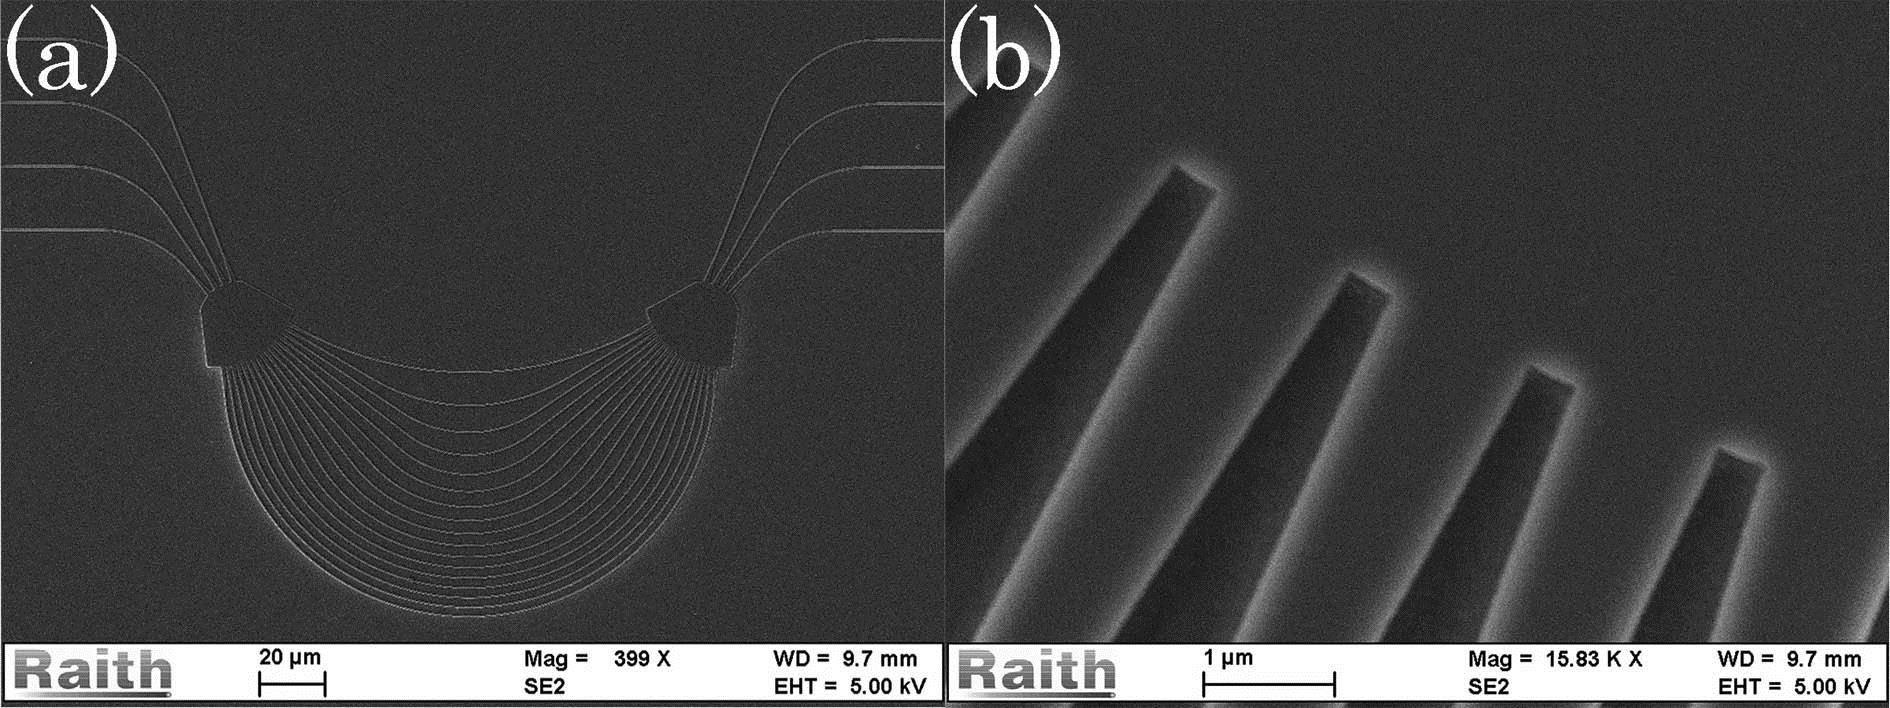 (a) Scanning electron microscope images of the fabricated AWGR and (b) tapers between the FPR and arrayed waveguides.